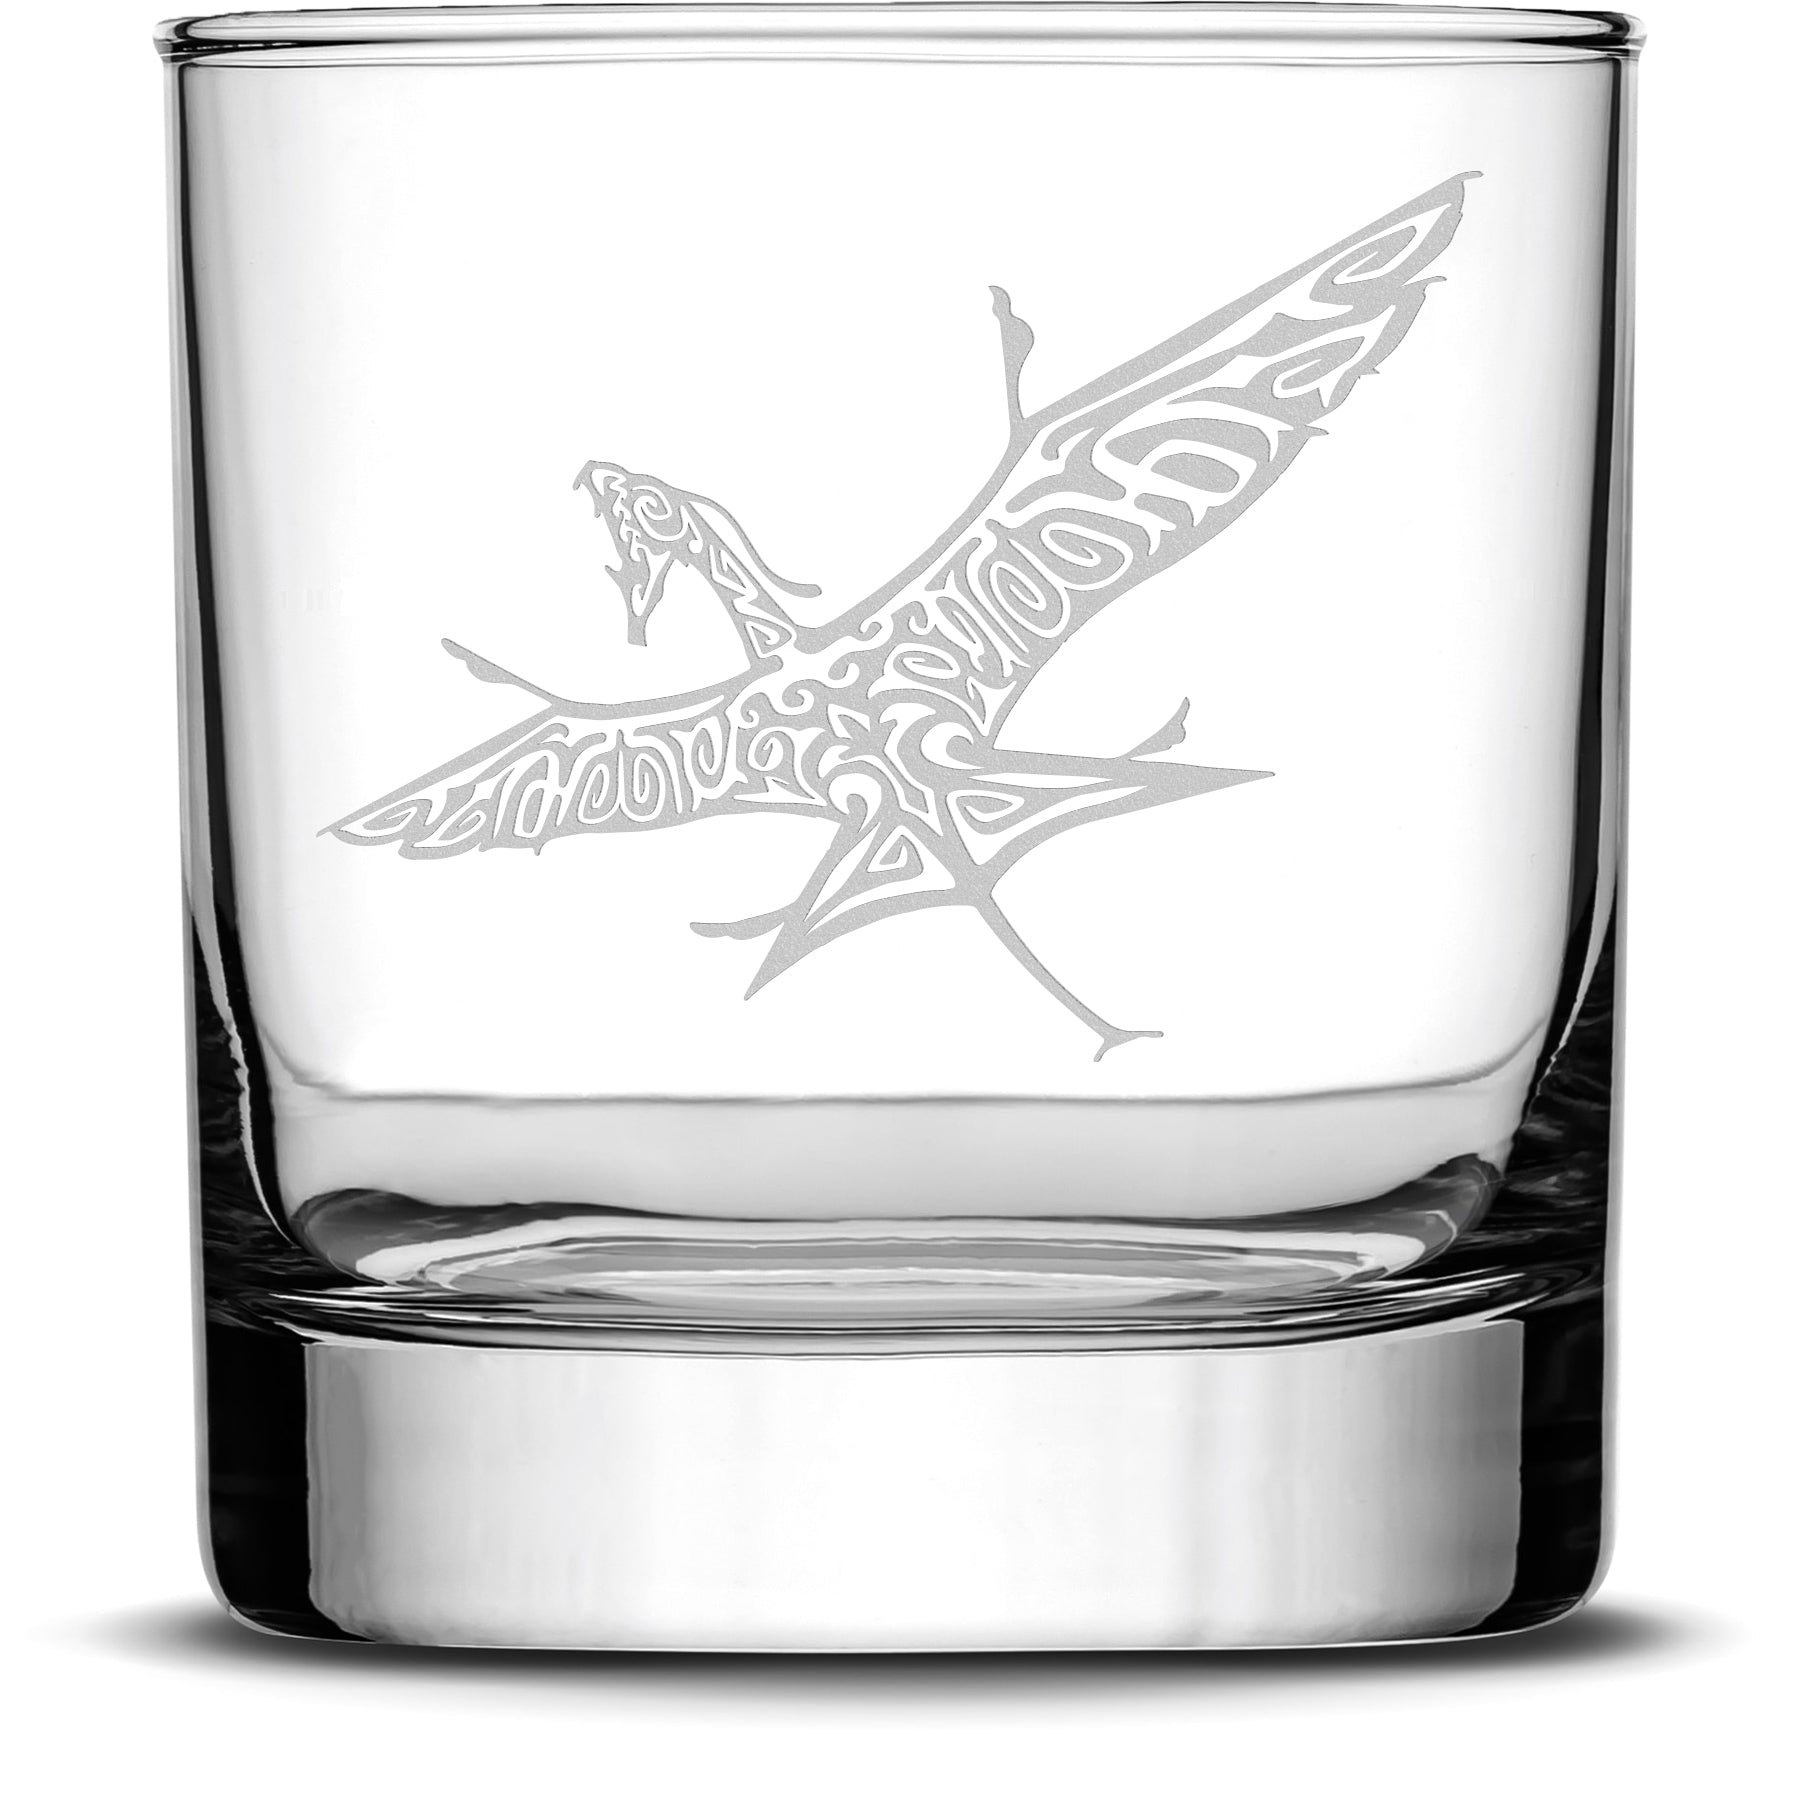 Premium Whiskey Glass, Avatar Banshee, 11oz, Laser Etched or Hand Etched